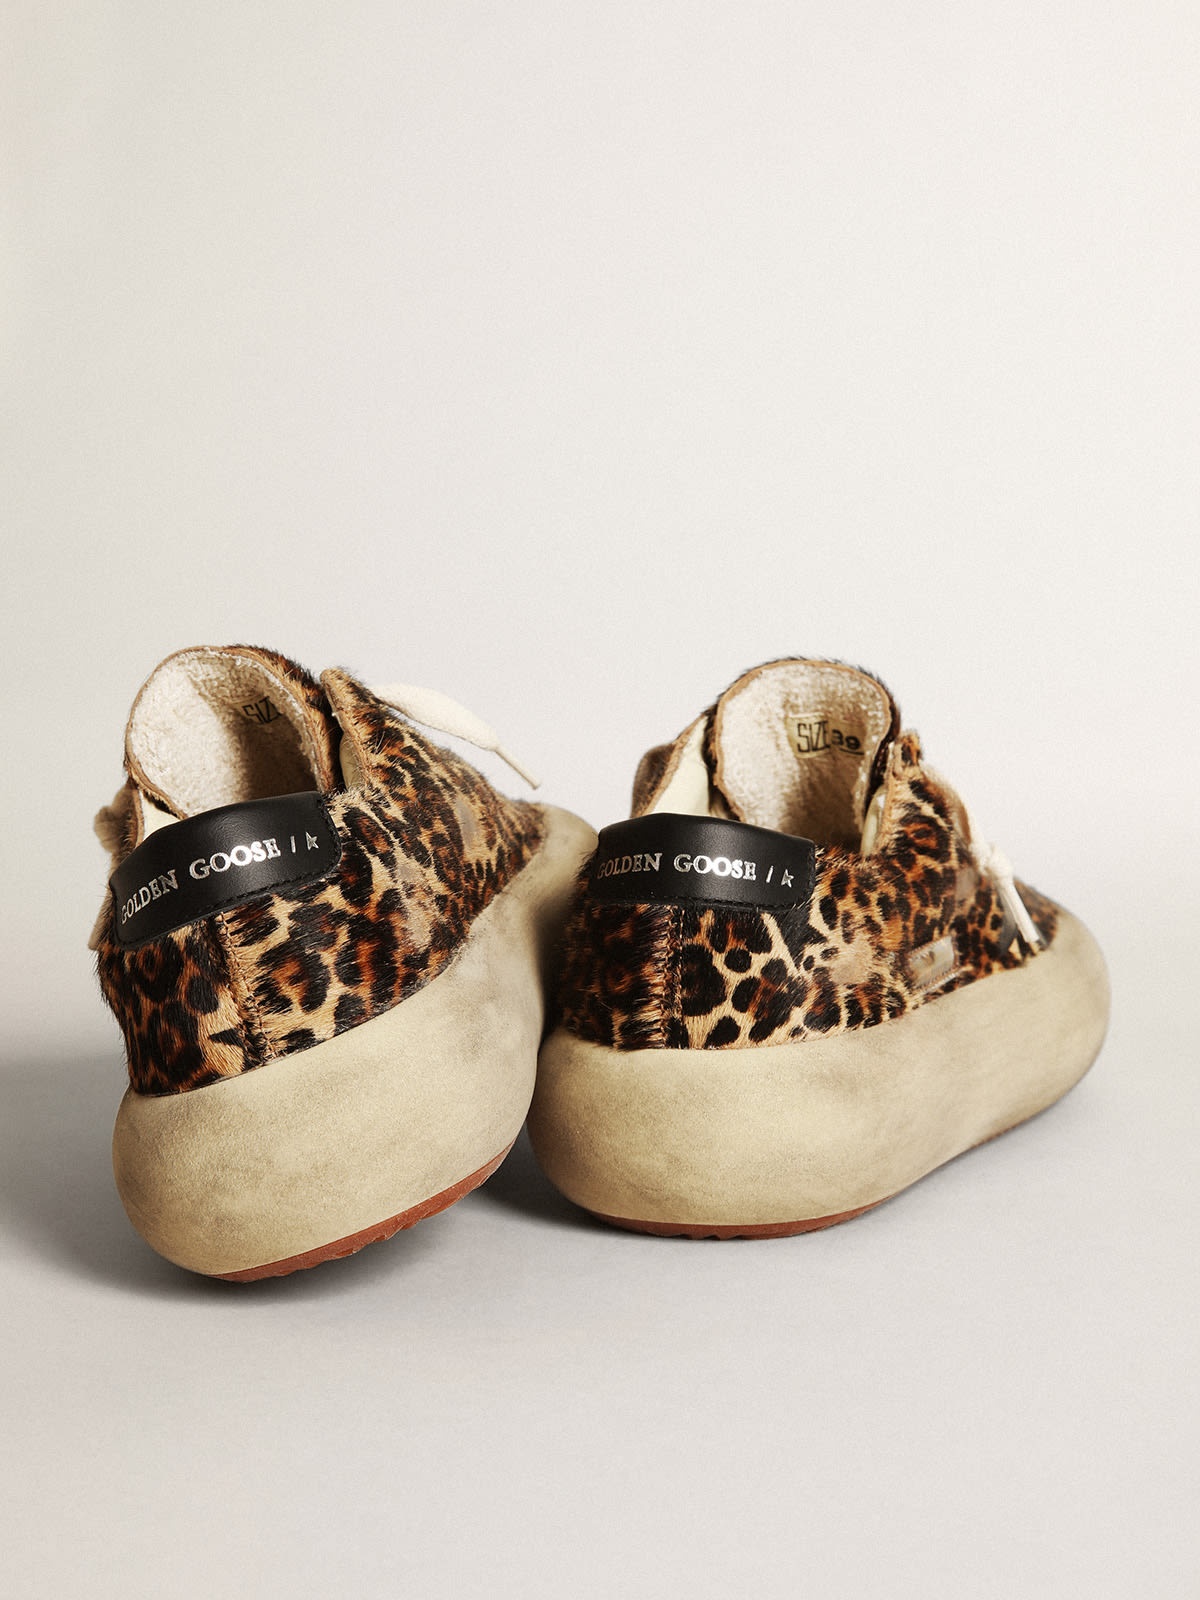 Women's Space-Star shoes in leopard-print pony skin with black leather star and heel tab - 5